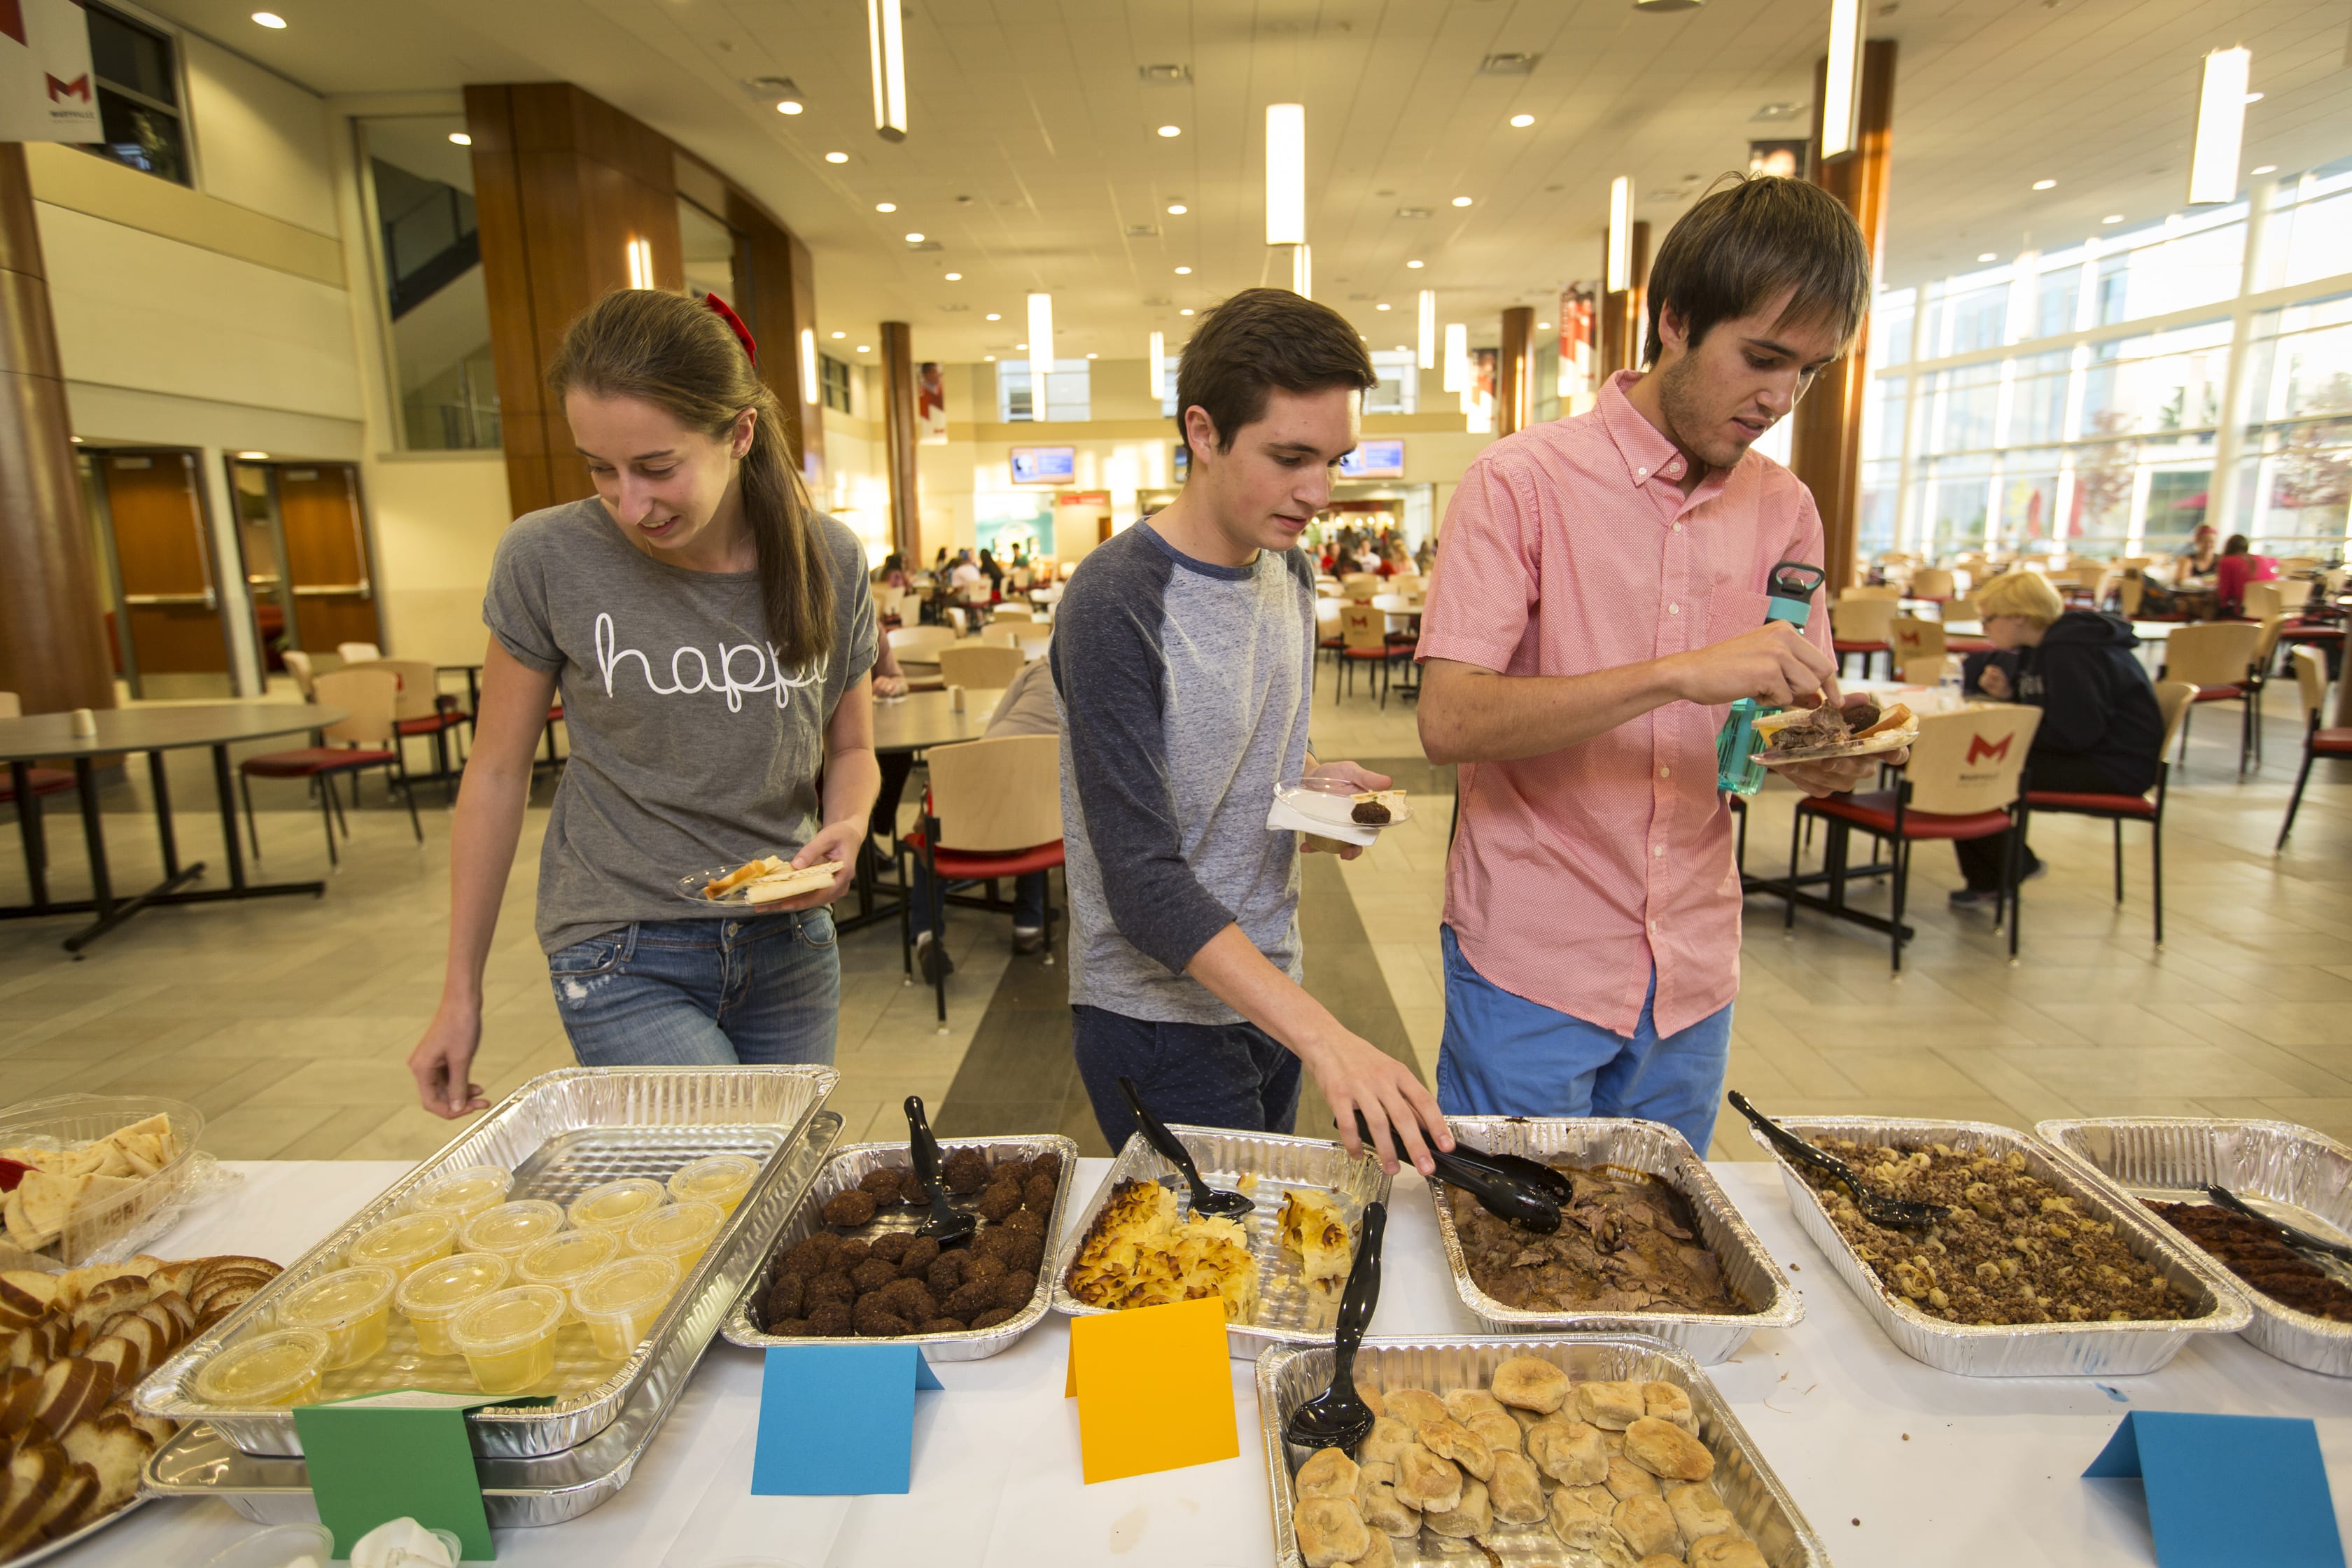 Jewish Cultural Food Fest at Maryville University